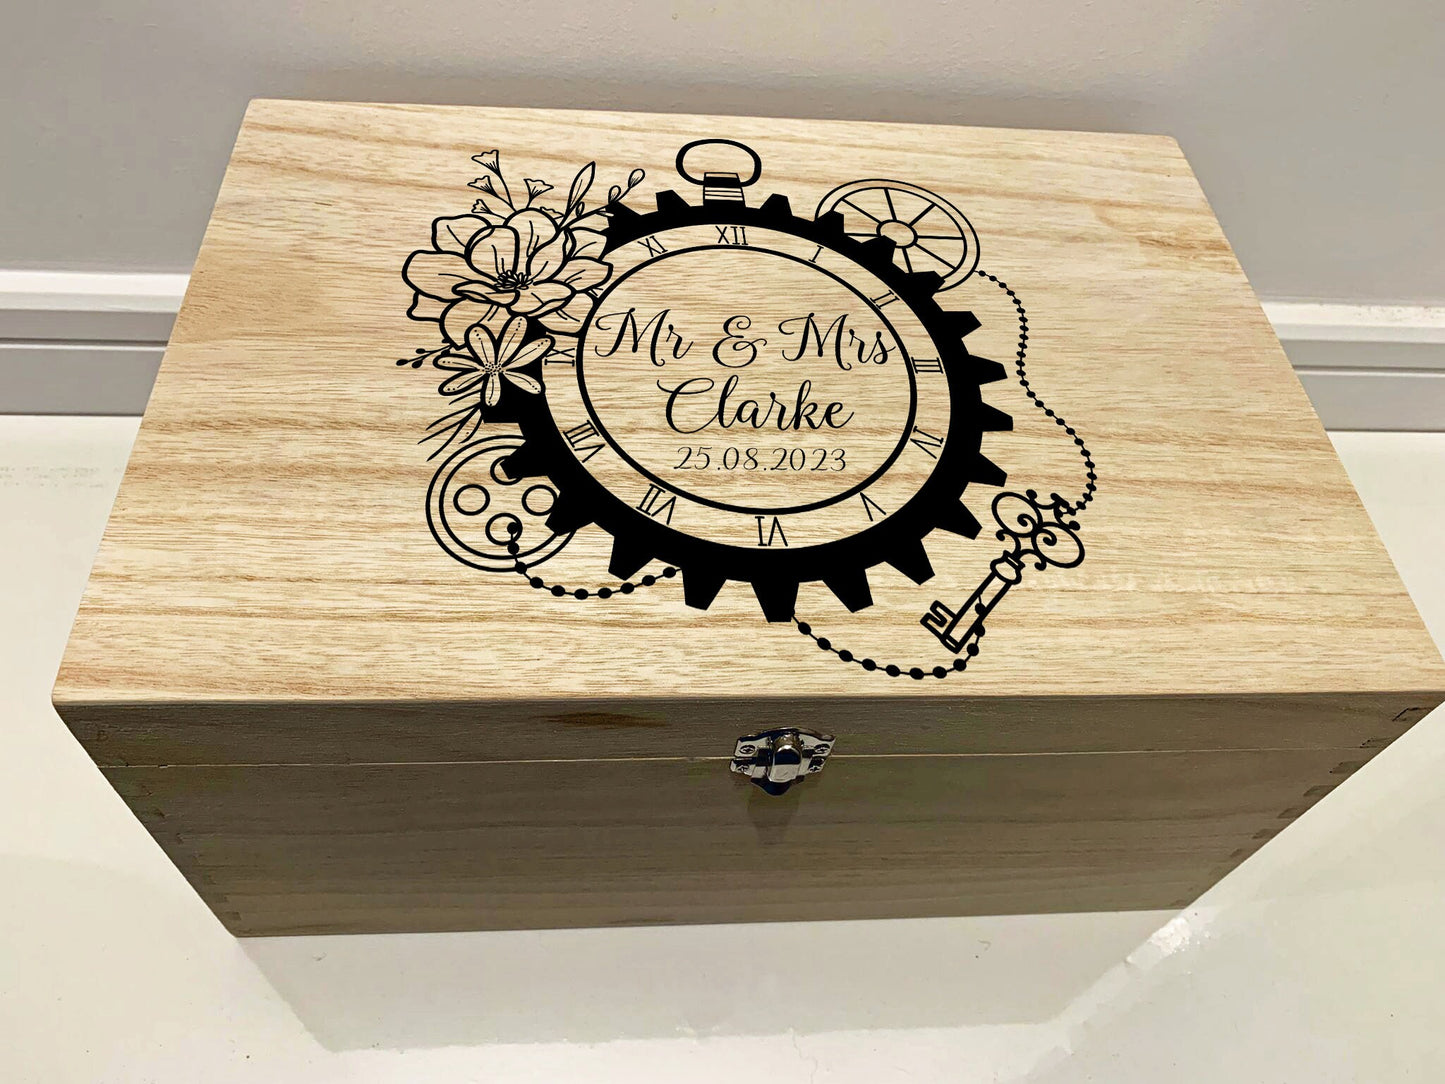 Large Personalised Engraved Wooden Steampunk Wedding Keepsake Memory Box with Gears and Flowers - Resplendent Aurora